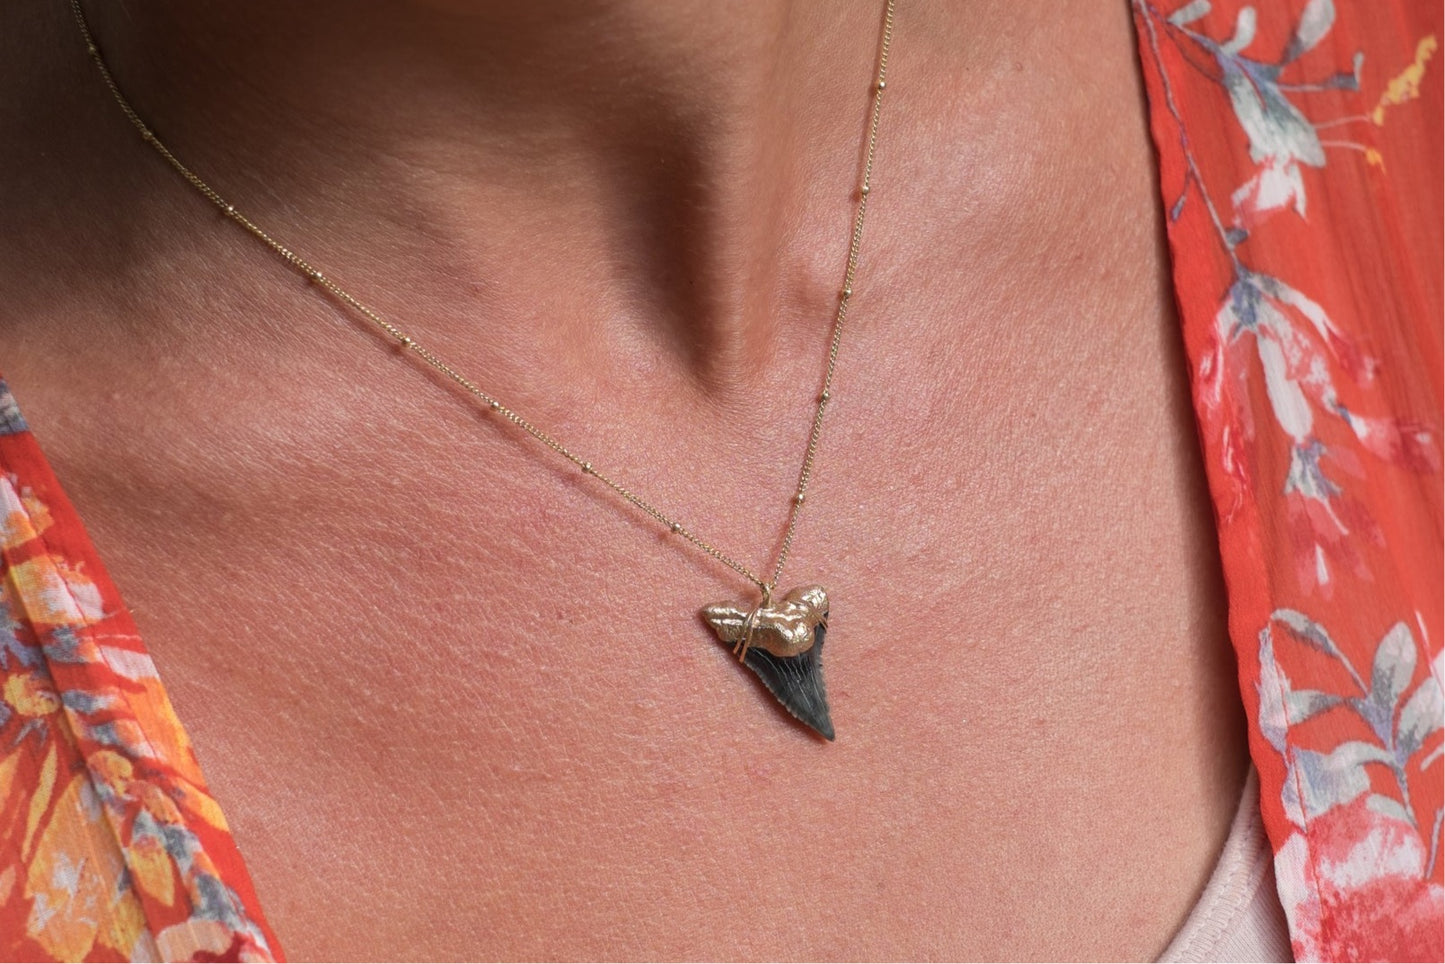 elegant shark tooth necklace with real shark tooth from snaggletooth hemi and her gold tip necklace on satellite chain worn by model —Foxy Fossils 